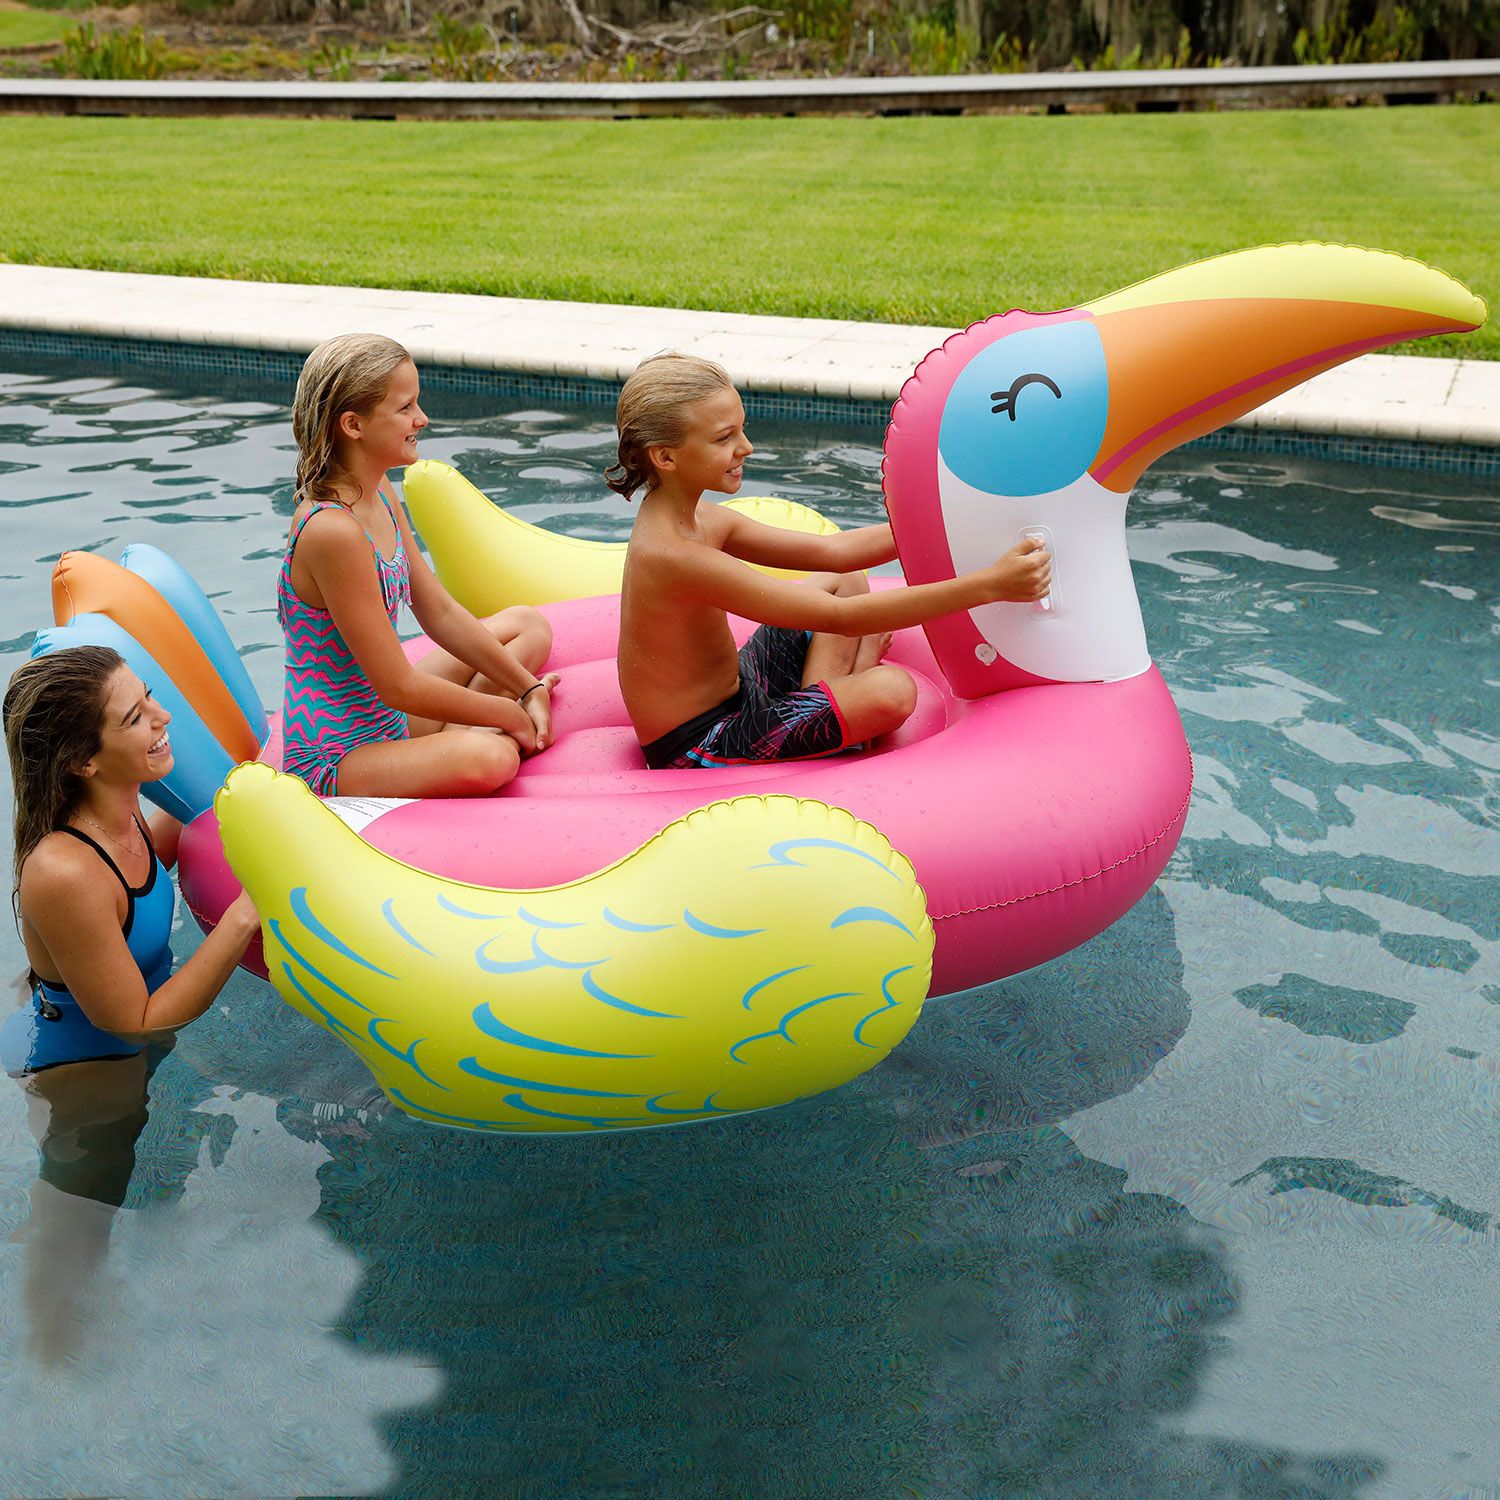 these massive pool floats from sam's club make it so easy to enjoy summer with your bffs